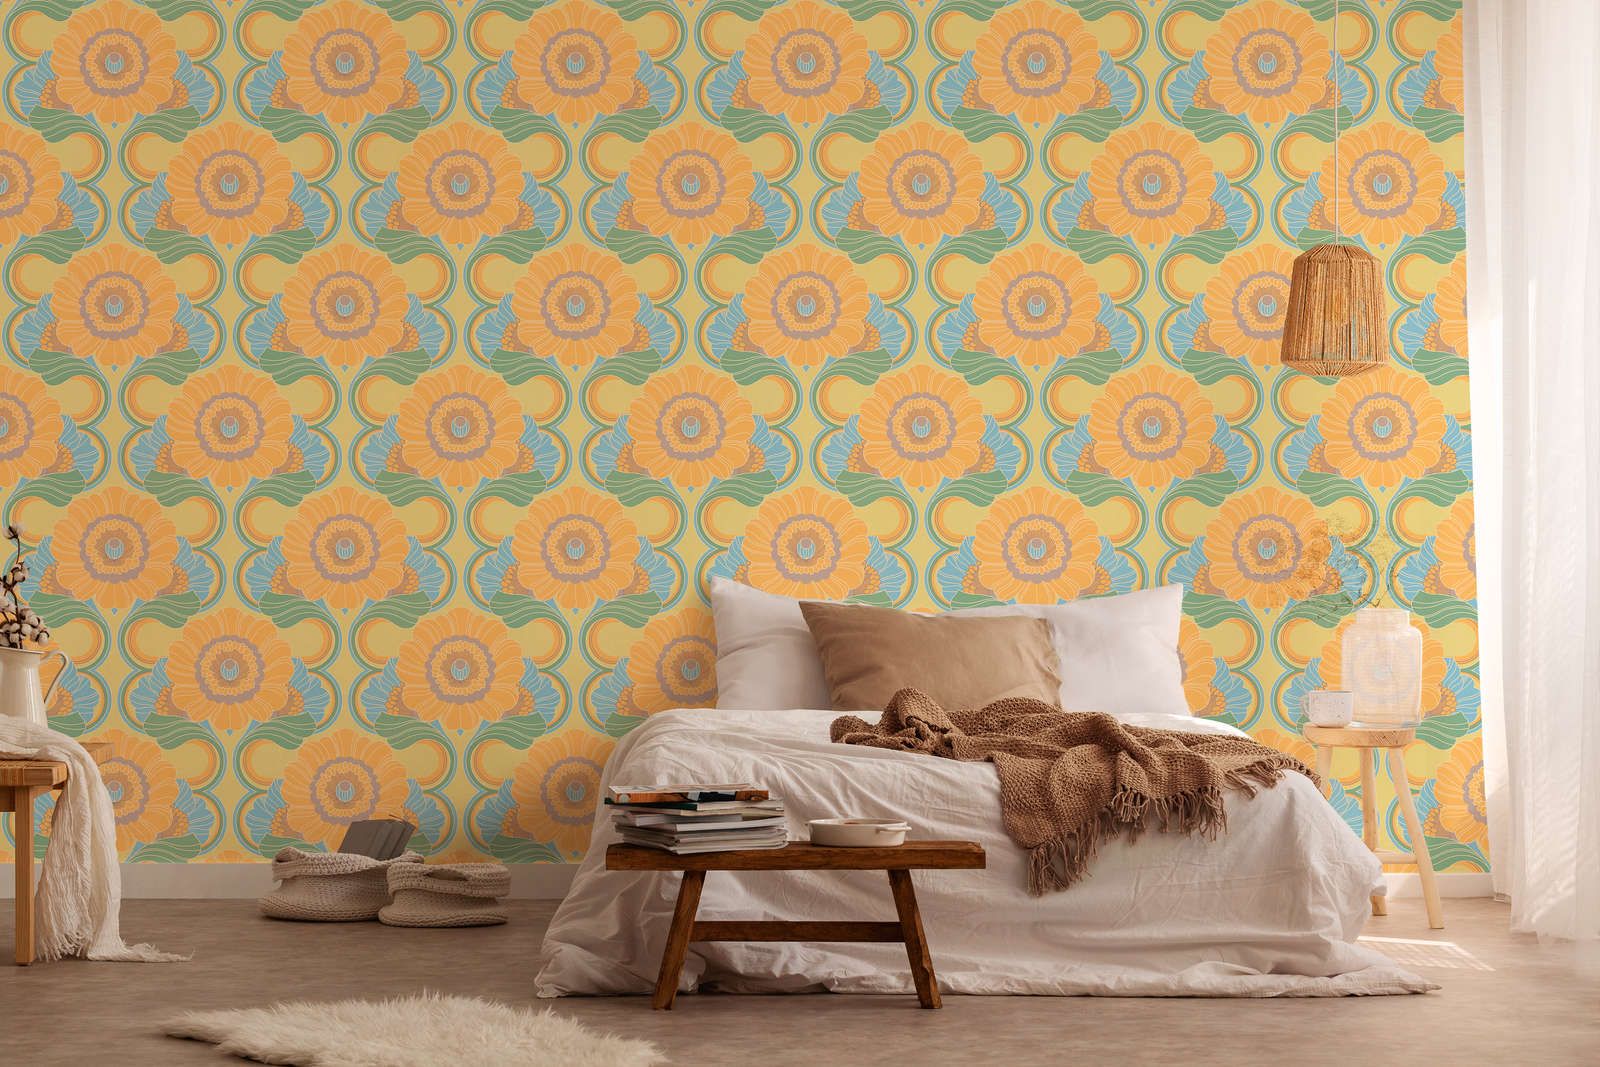             Lightly textured retro wallpaper with floral pattern - blue, yellow, green
        